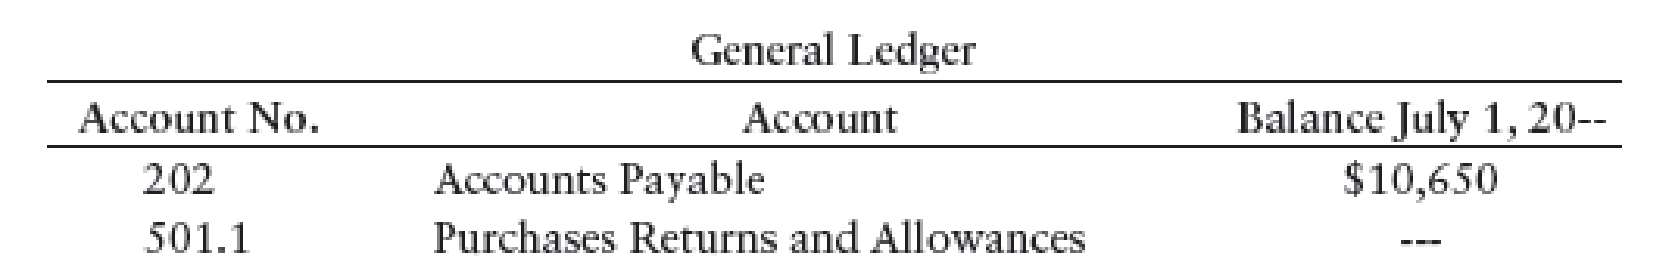 Chapter 11, Problem 6SEA, JOURNALIZING PURCHASES RETURNS AND ALLOWANCES AND POSTING TO GENERAL LEDGER AND ACCOUNTS PAYABLE , example  1